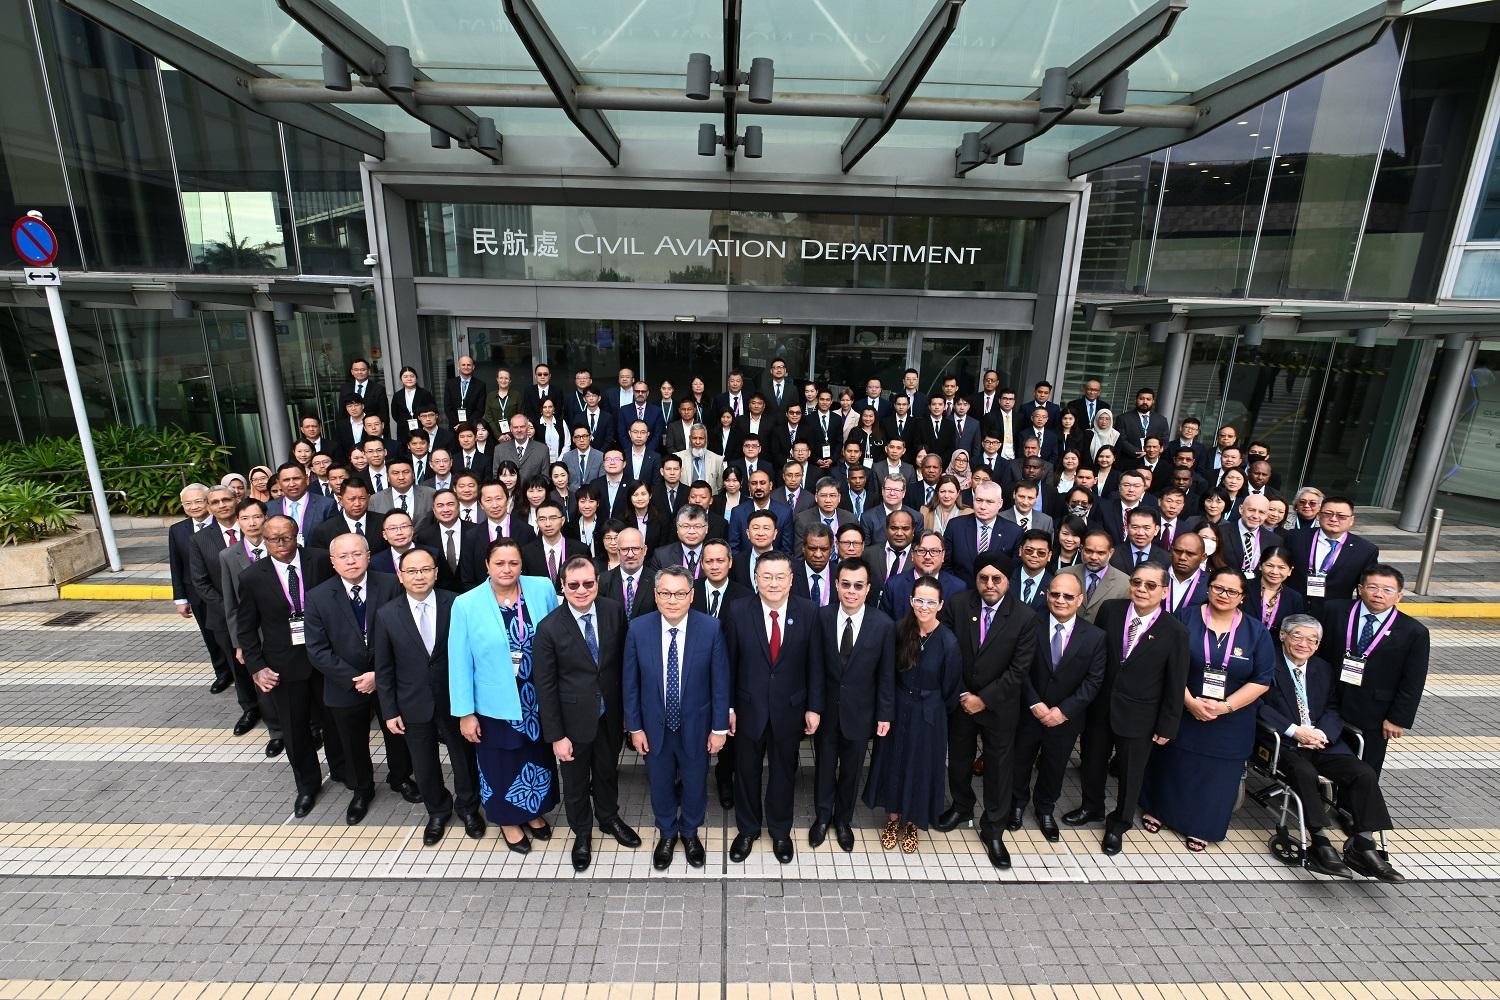 The International Civil Aviation Organization 34th Meeting of the Asia Pacific Air Navigation Planning and Implementation Regional Group took place at the Hong Kong Civil Aviation Department Headquarters from December 11 to 13. Photo shows delegates from Asia Pacific states and administrations as well as international organisations.